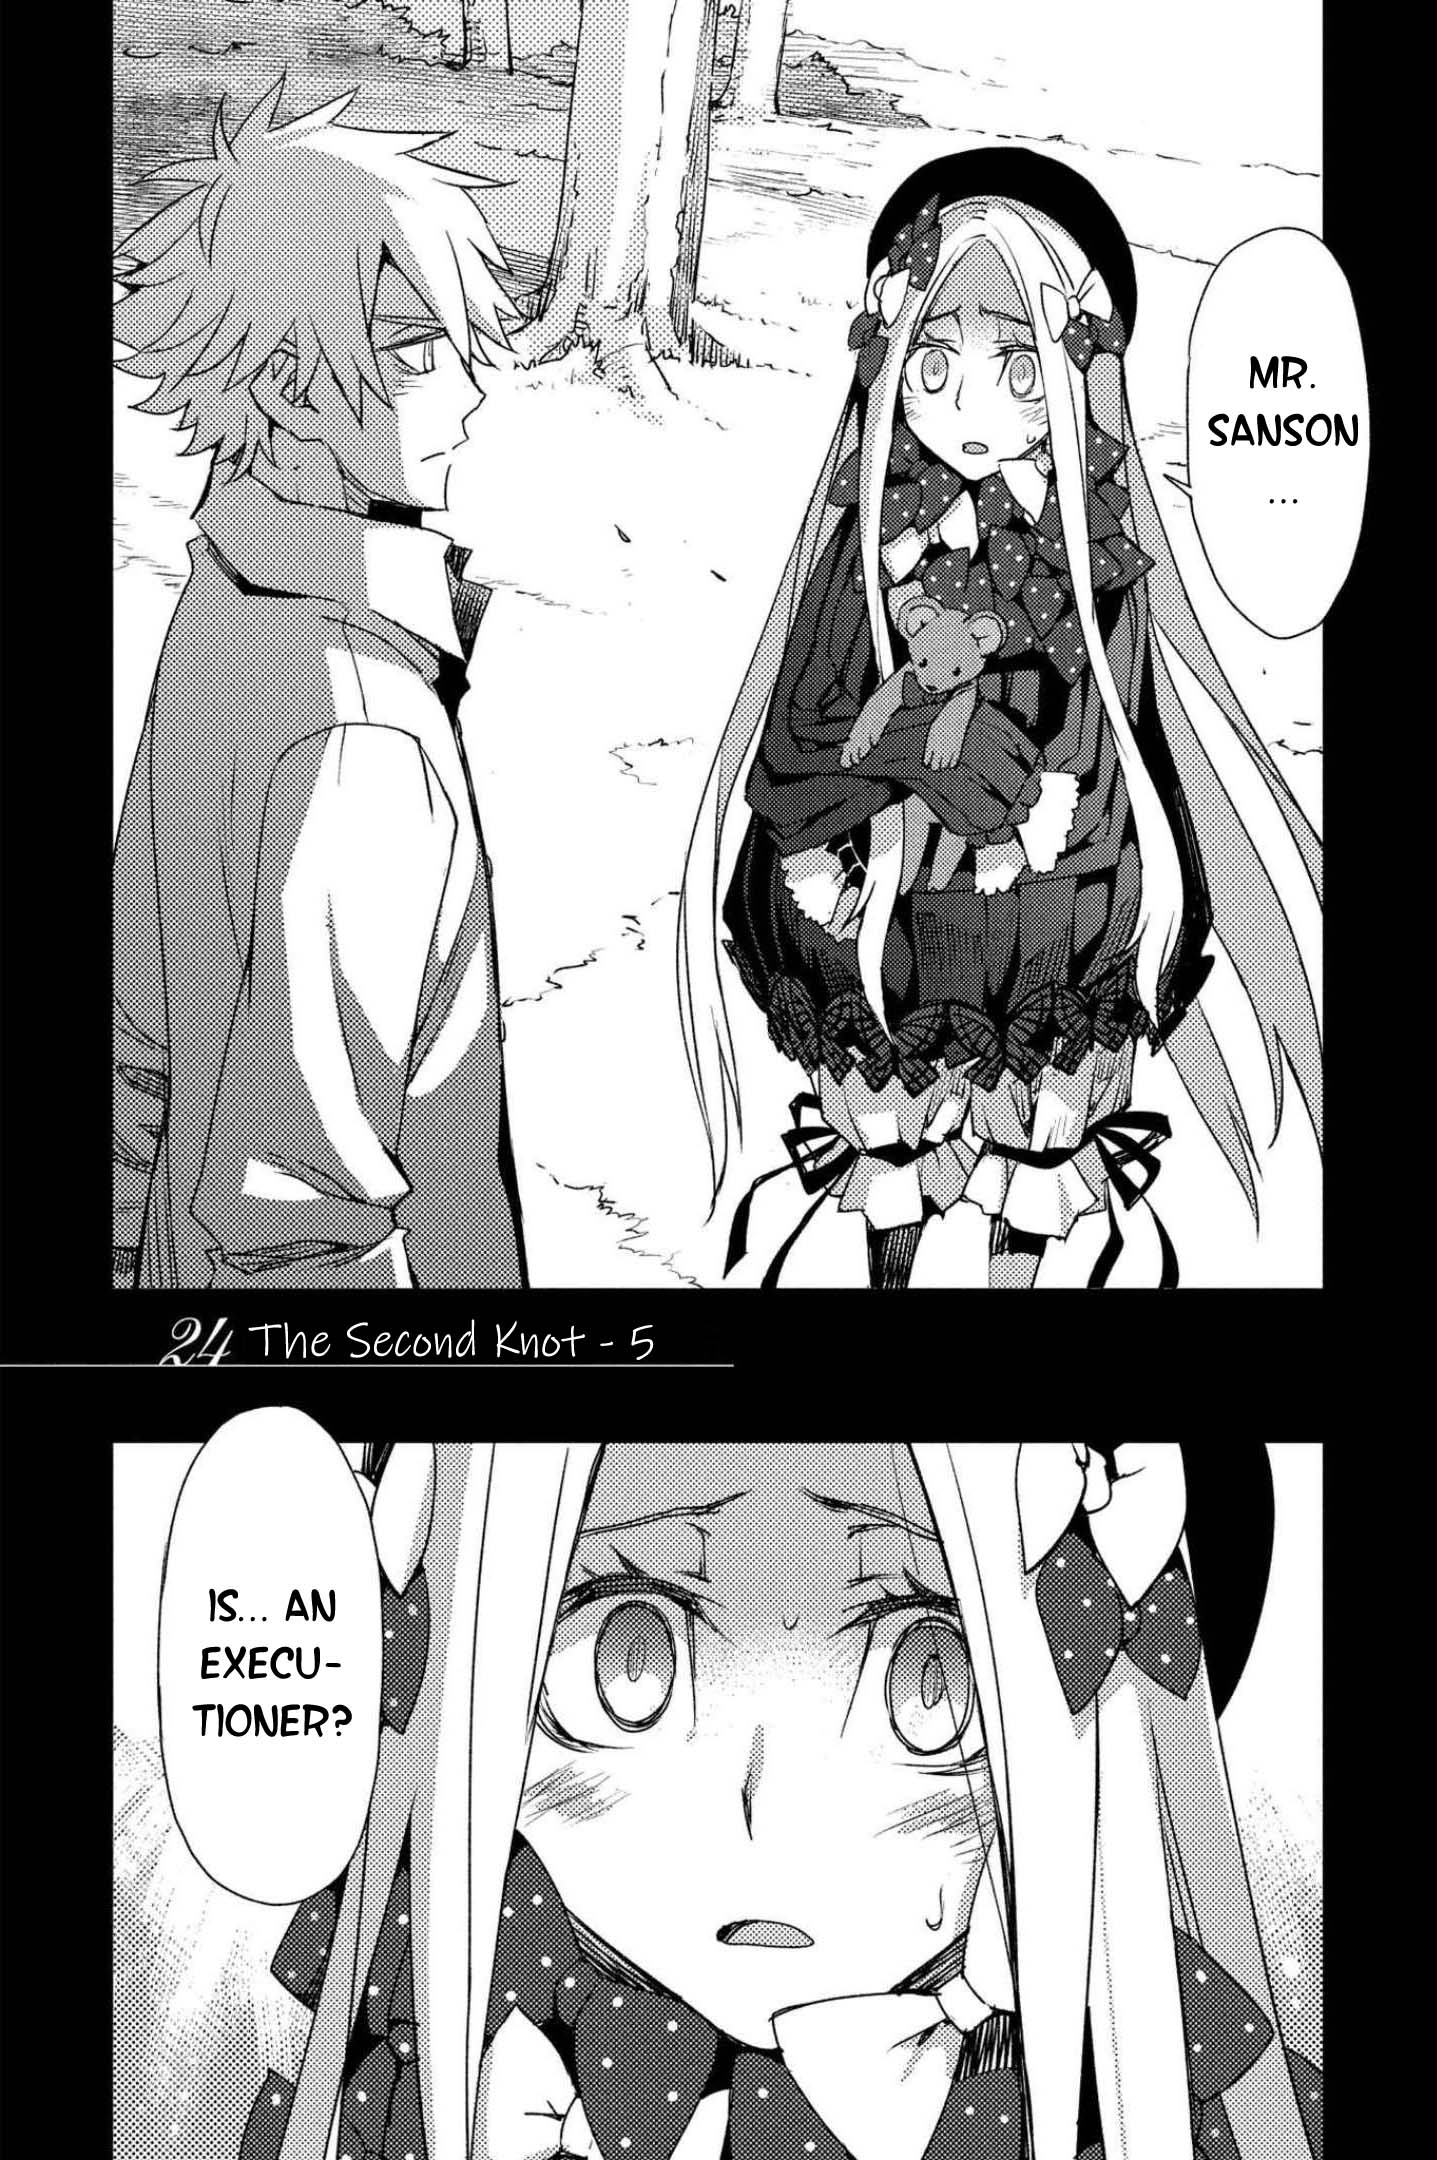 Fate/grand Order: Epic Of Remnant: Pseudo-Singularity Iv: The Forbidden Advent Garden, Salem - Heretical Salem Vol.4 Chapter 24: The Second Knot - 5 - Picture 1